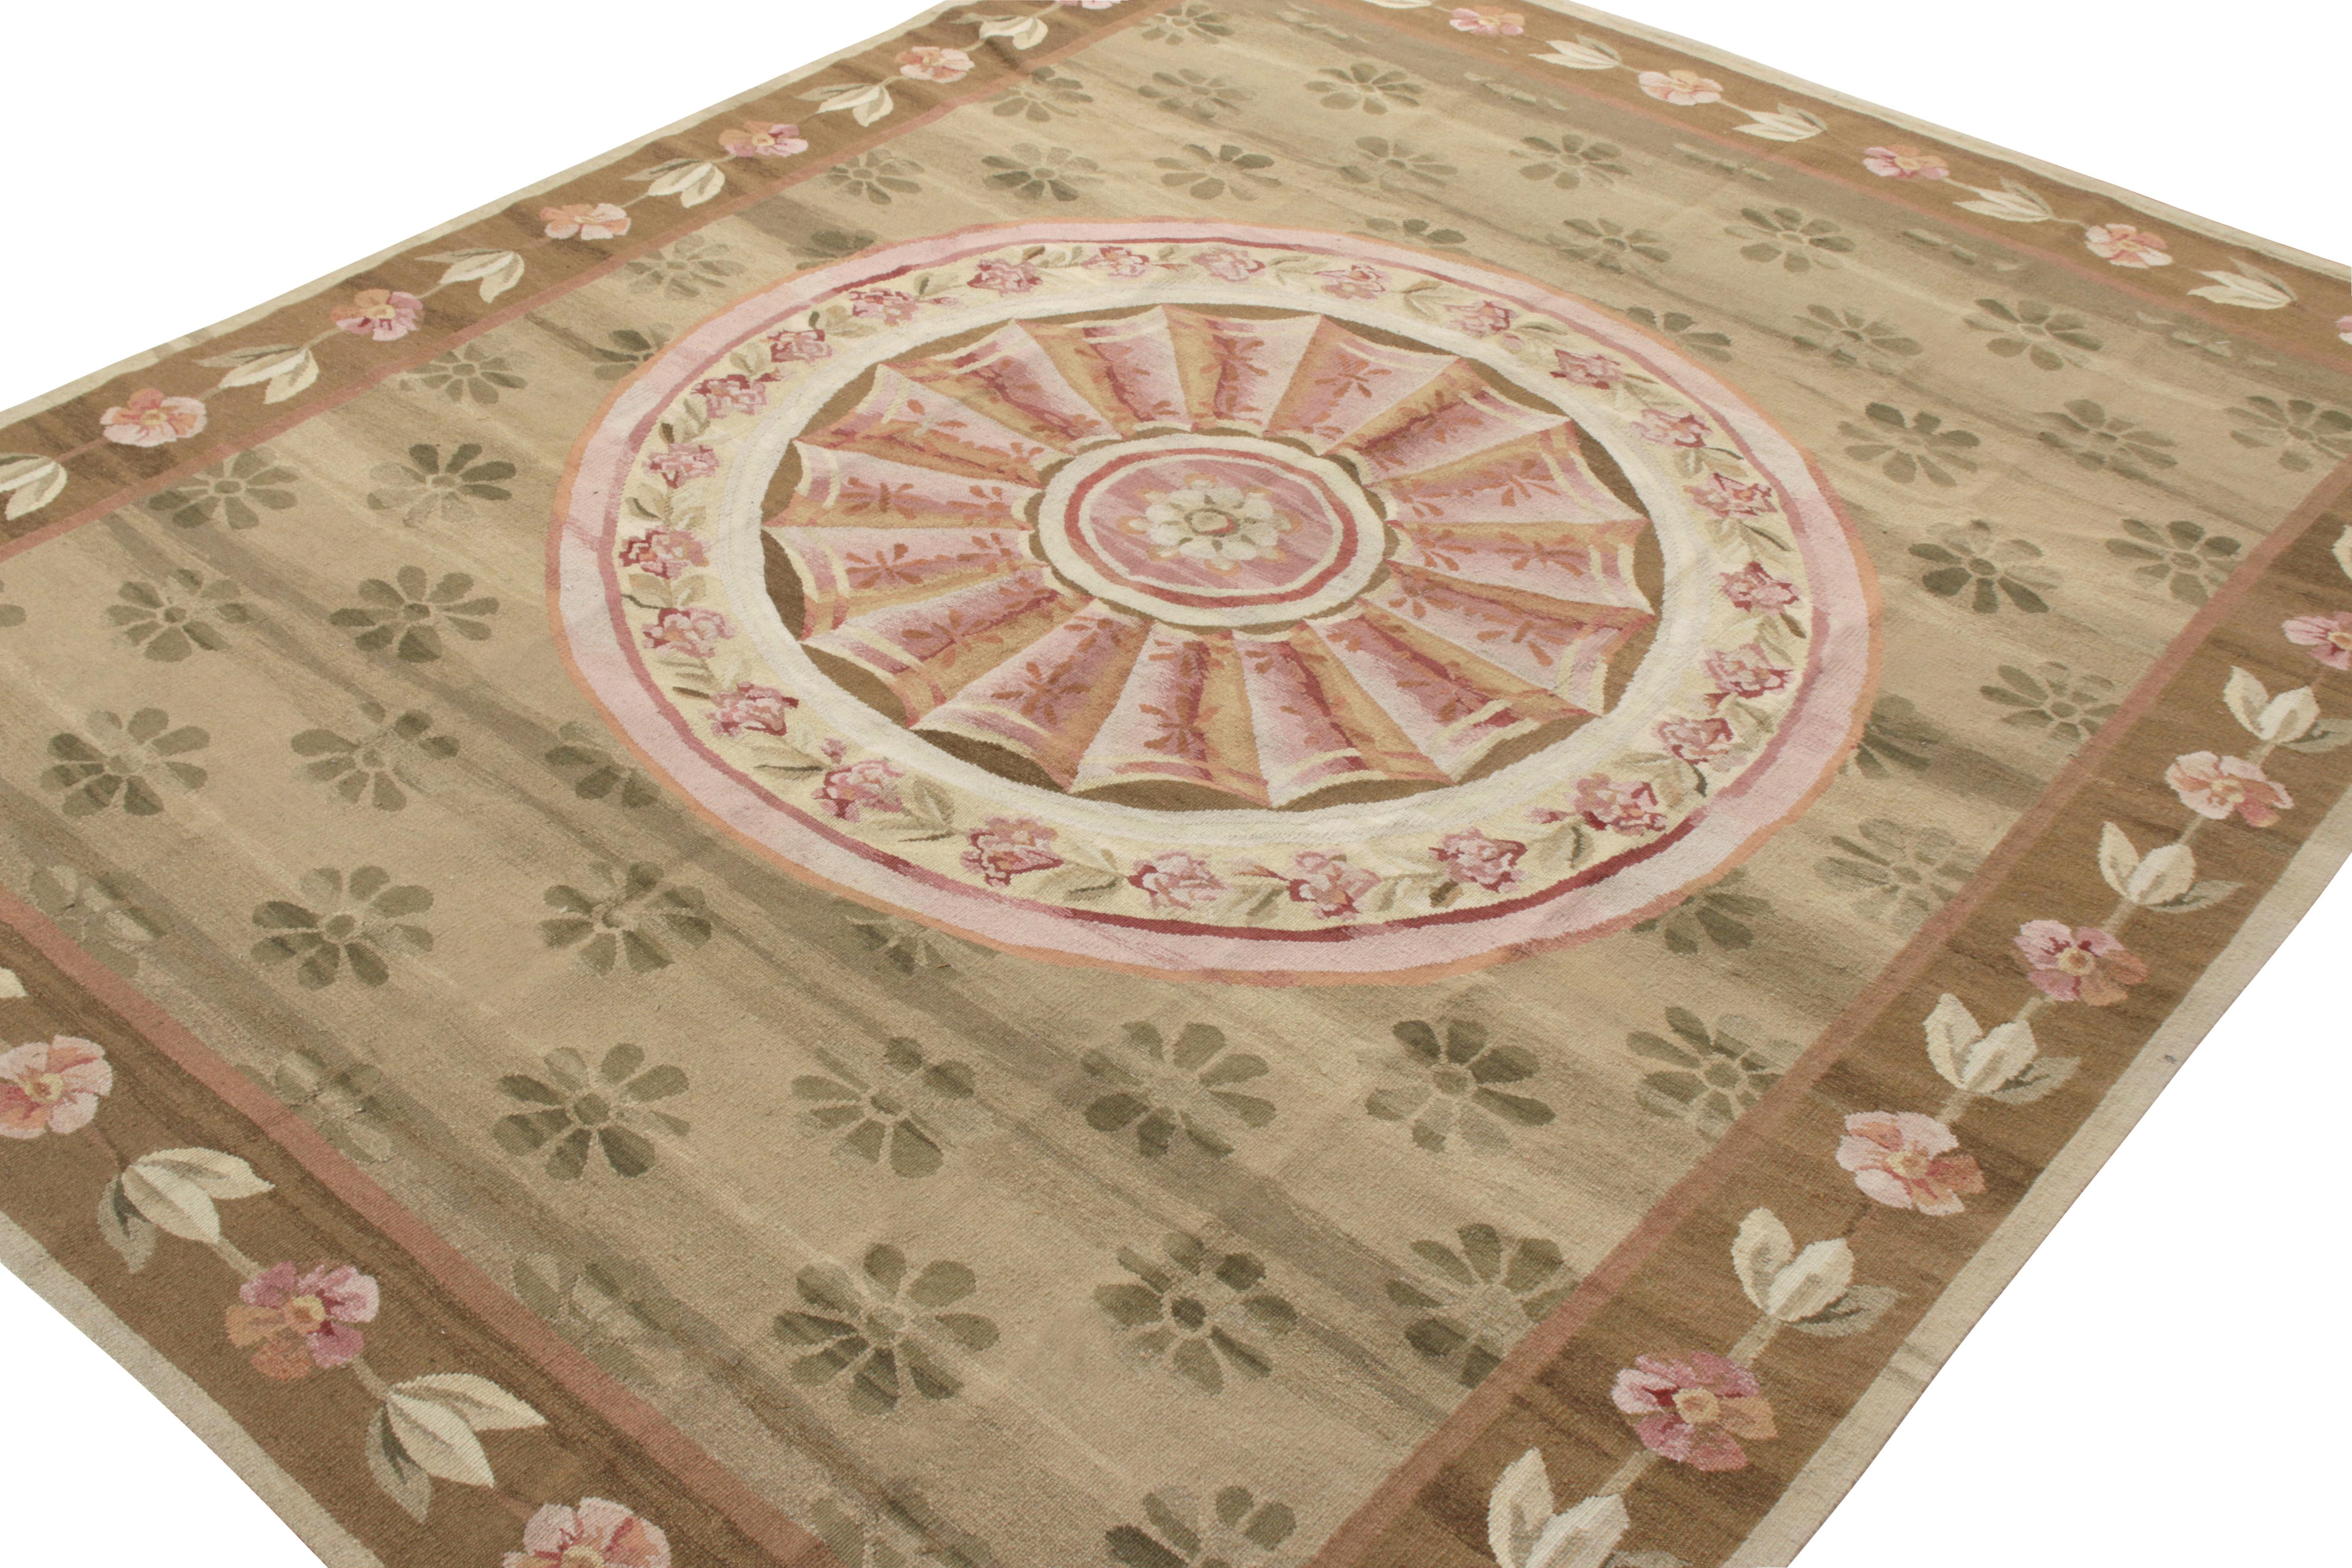 Chinese Rug & Kilim’s Aubusson Style Flatweave, Brown, Green, Pink Medallion Pattern For Sale